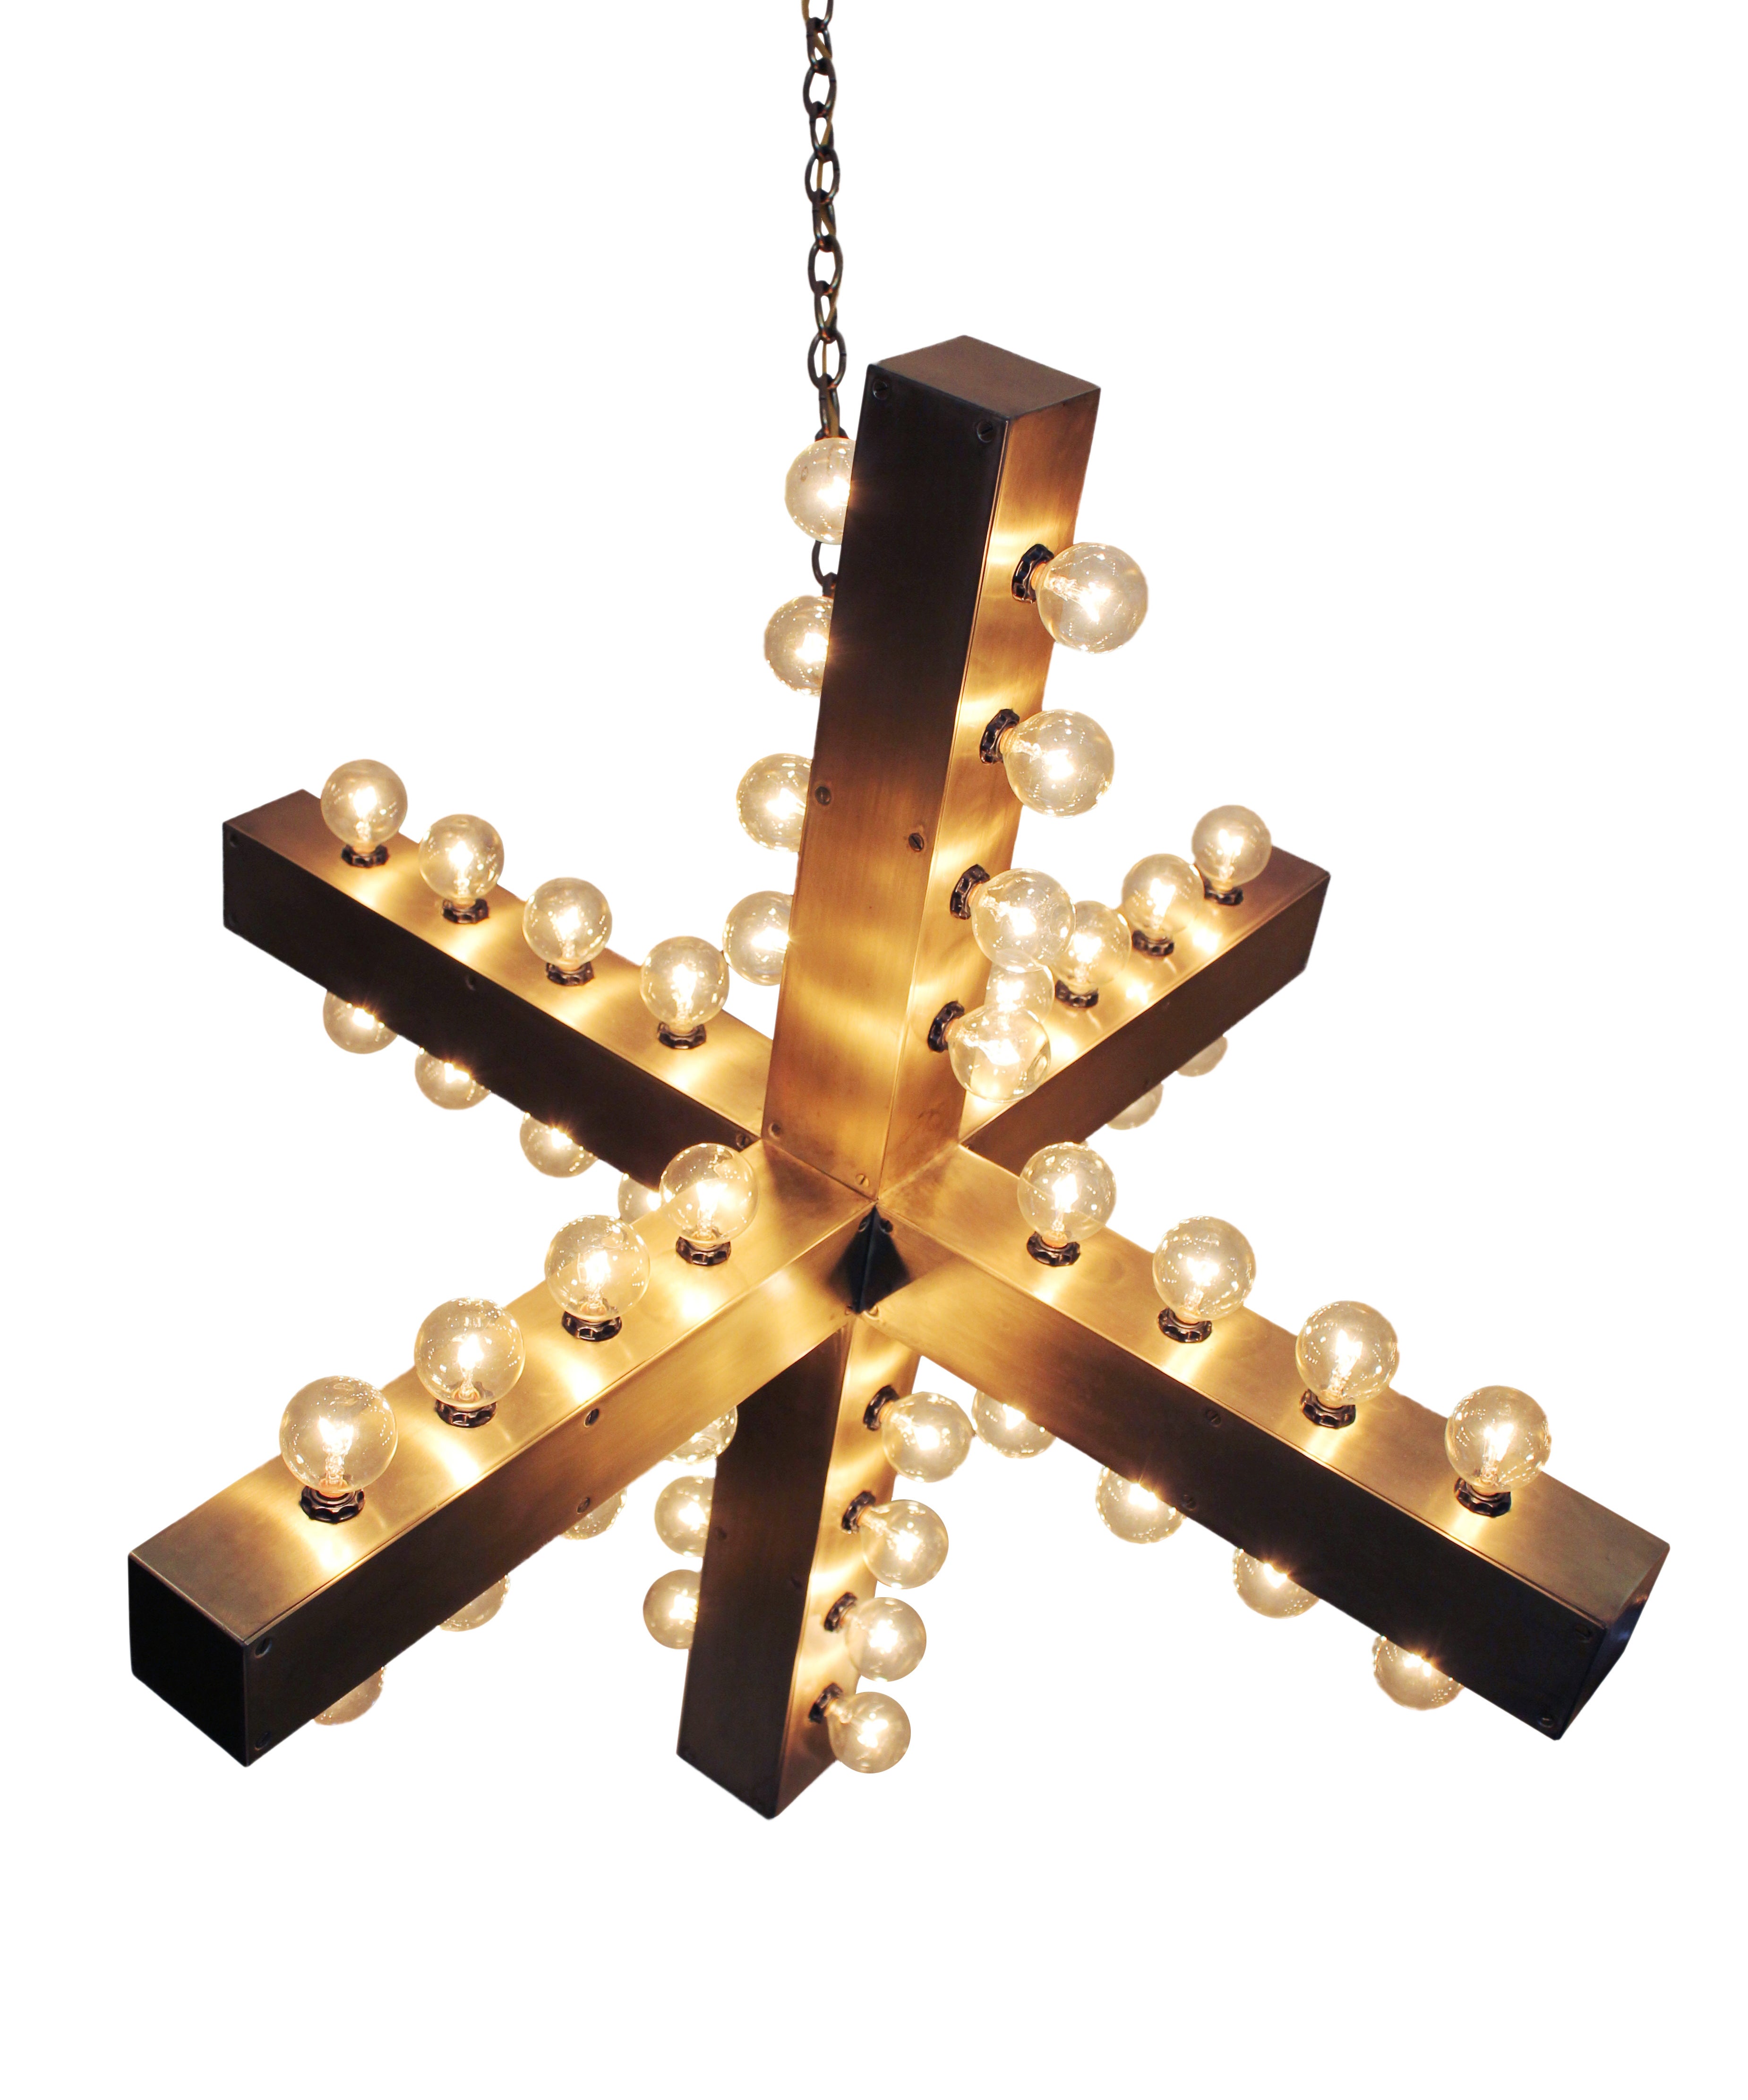 Downtown Classics Collection Intersection Chandelier For Sale